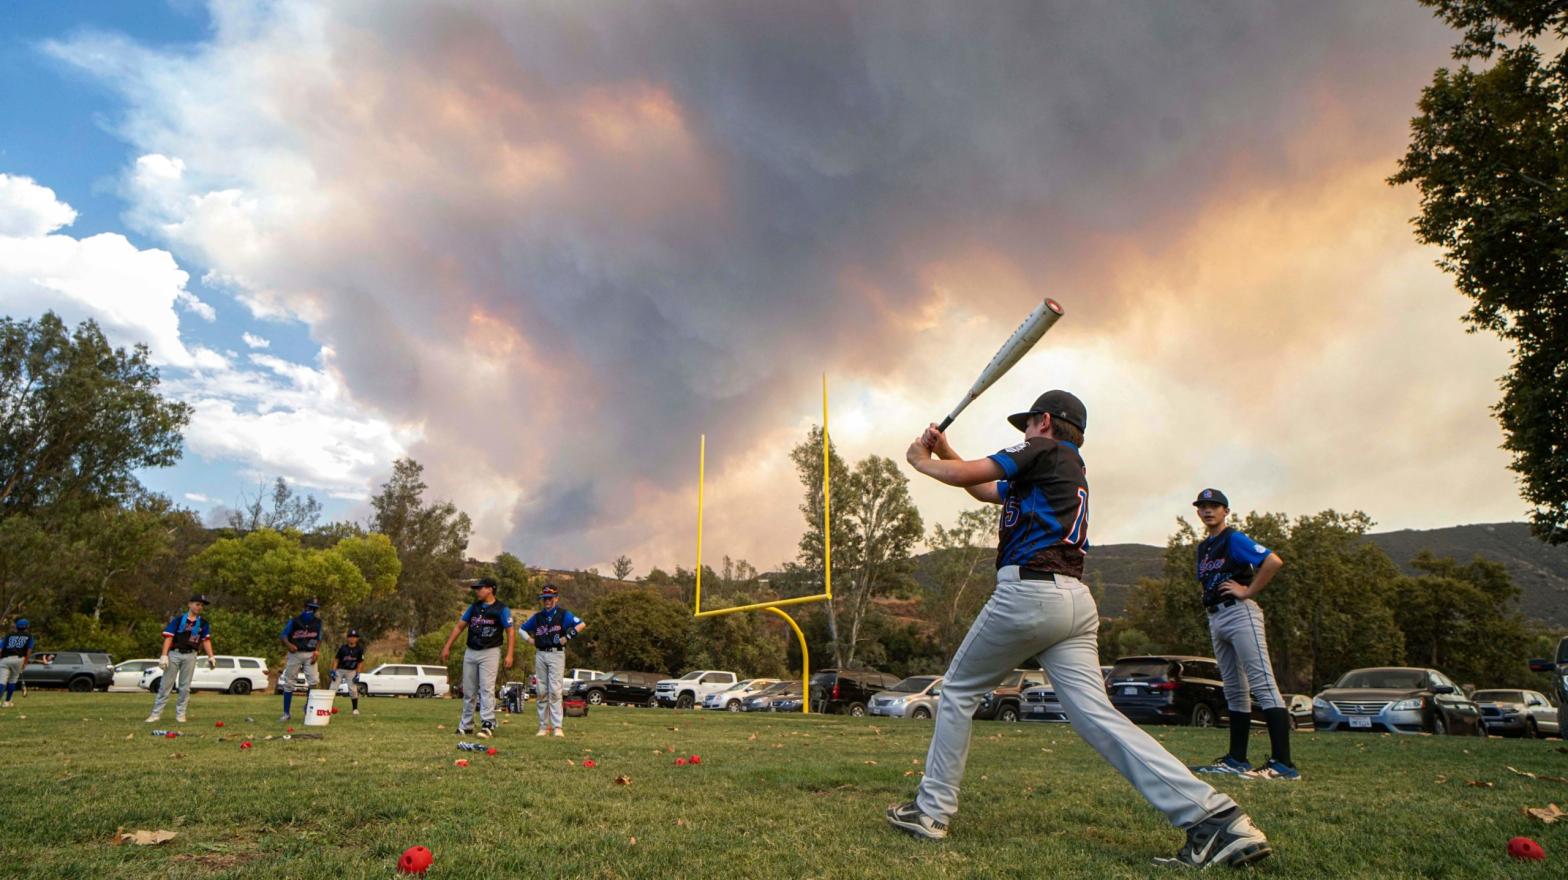 Little League players warm up before a game as the Valley Fire burns in the background near San Diego. (Photo: Sandy Huffaker/AFP, Getty Images)